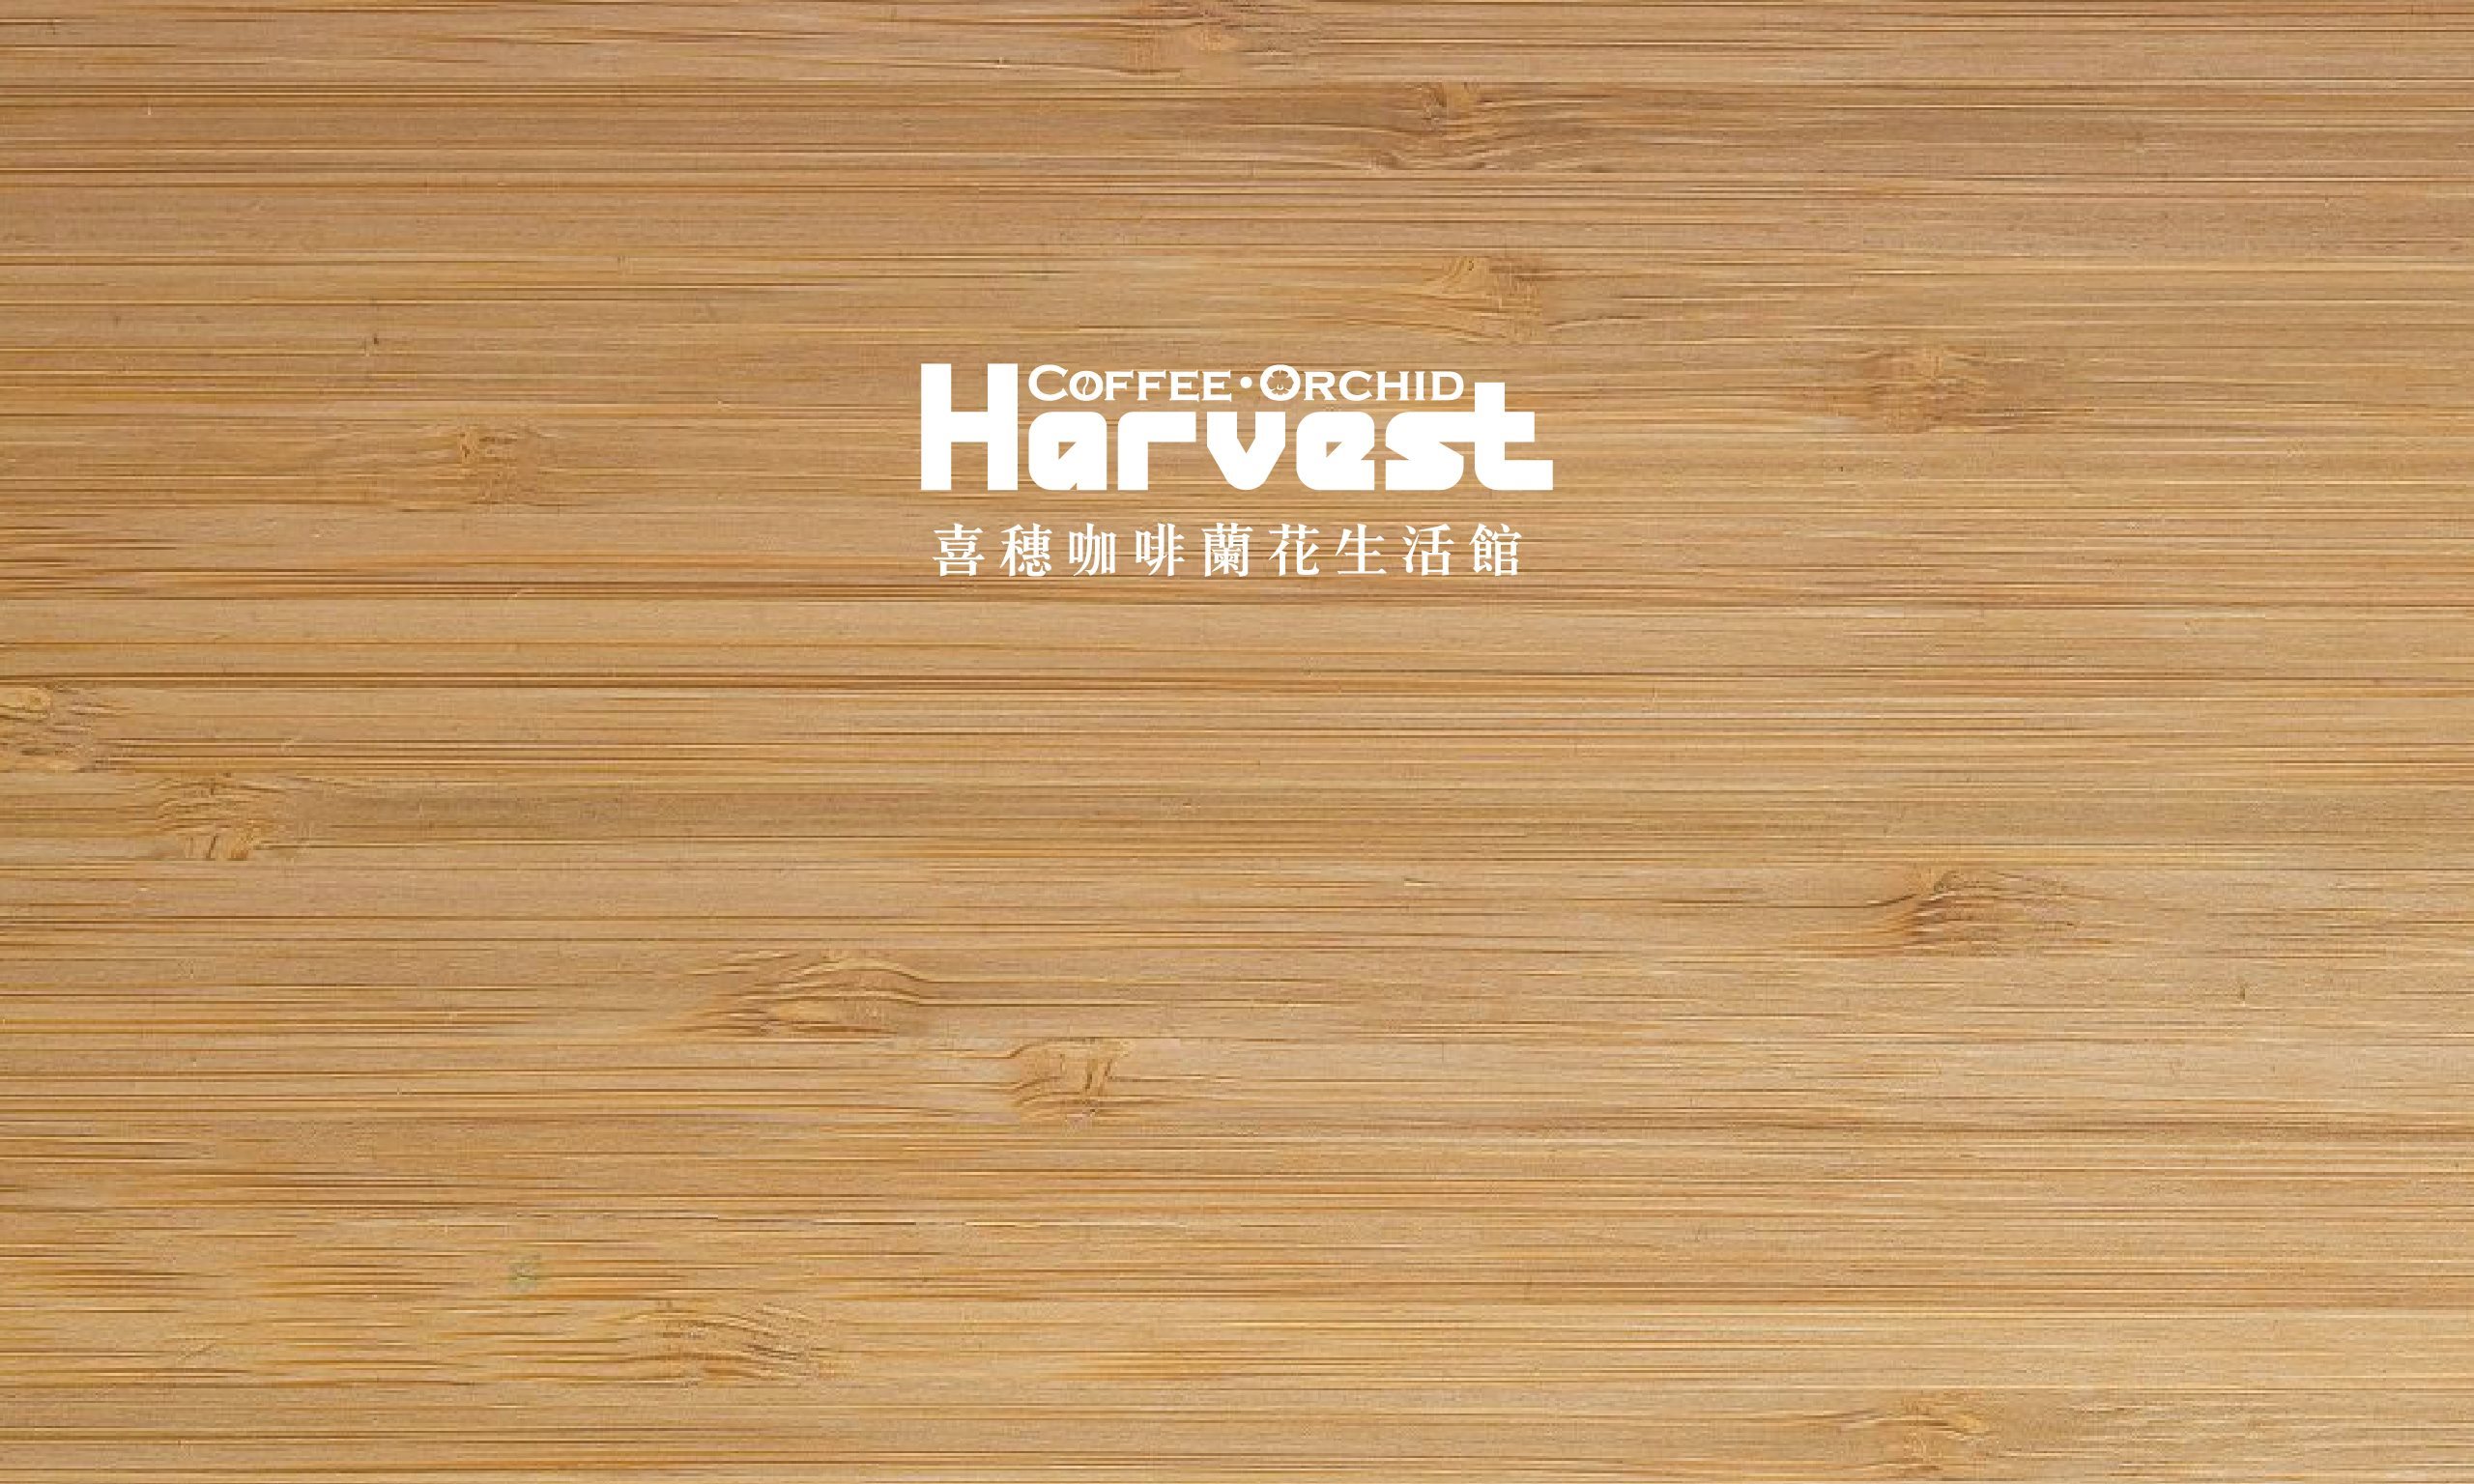 Harvest Coffee & Orchid Cafe - Taiwan brand design